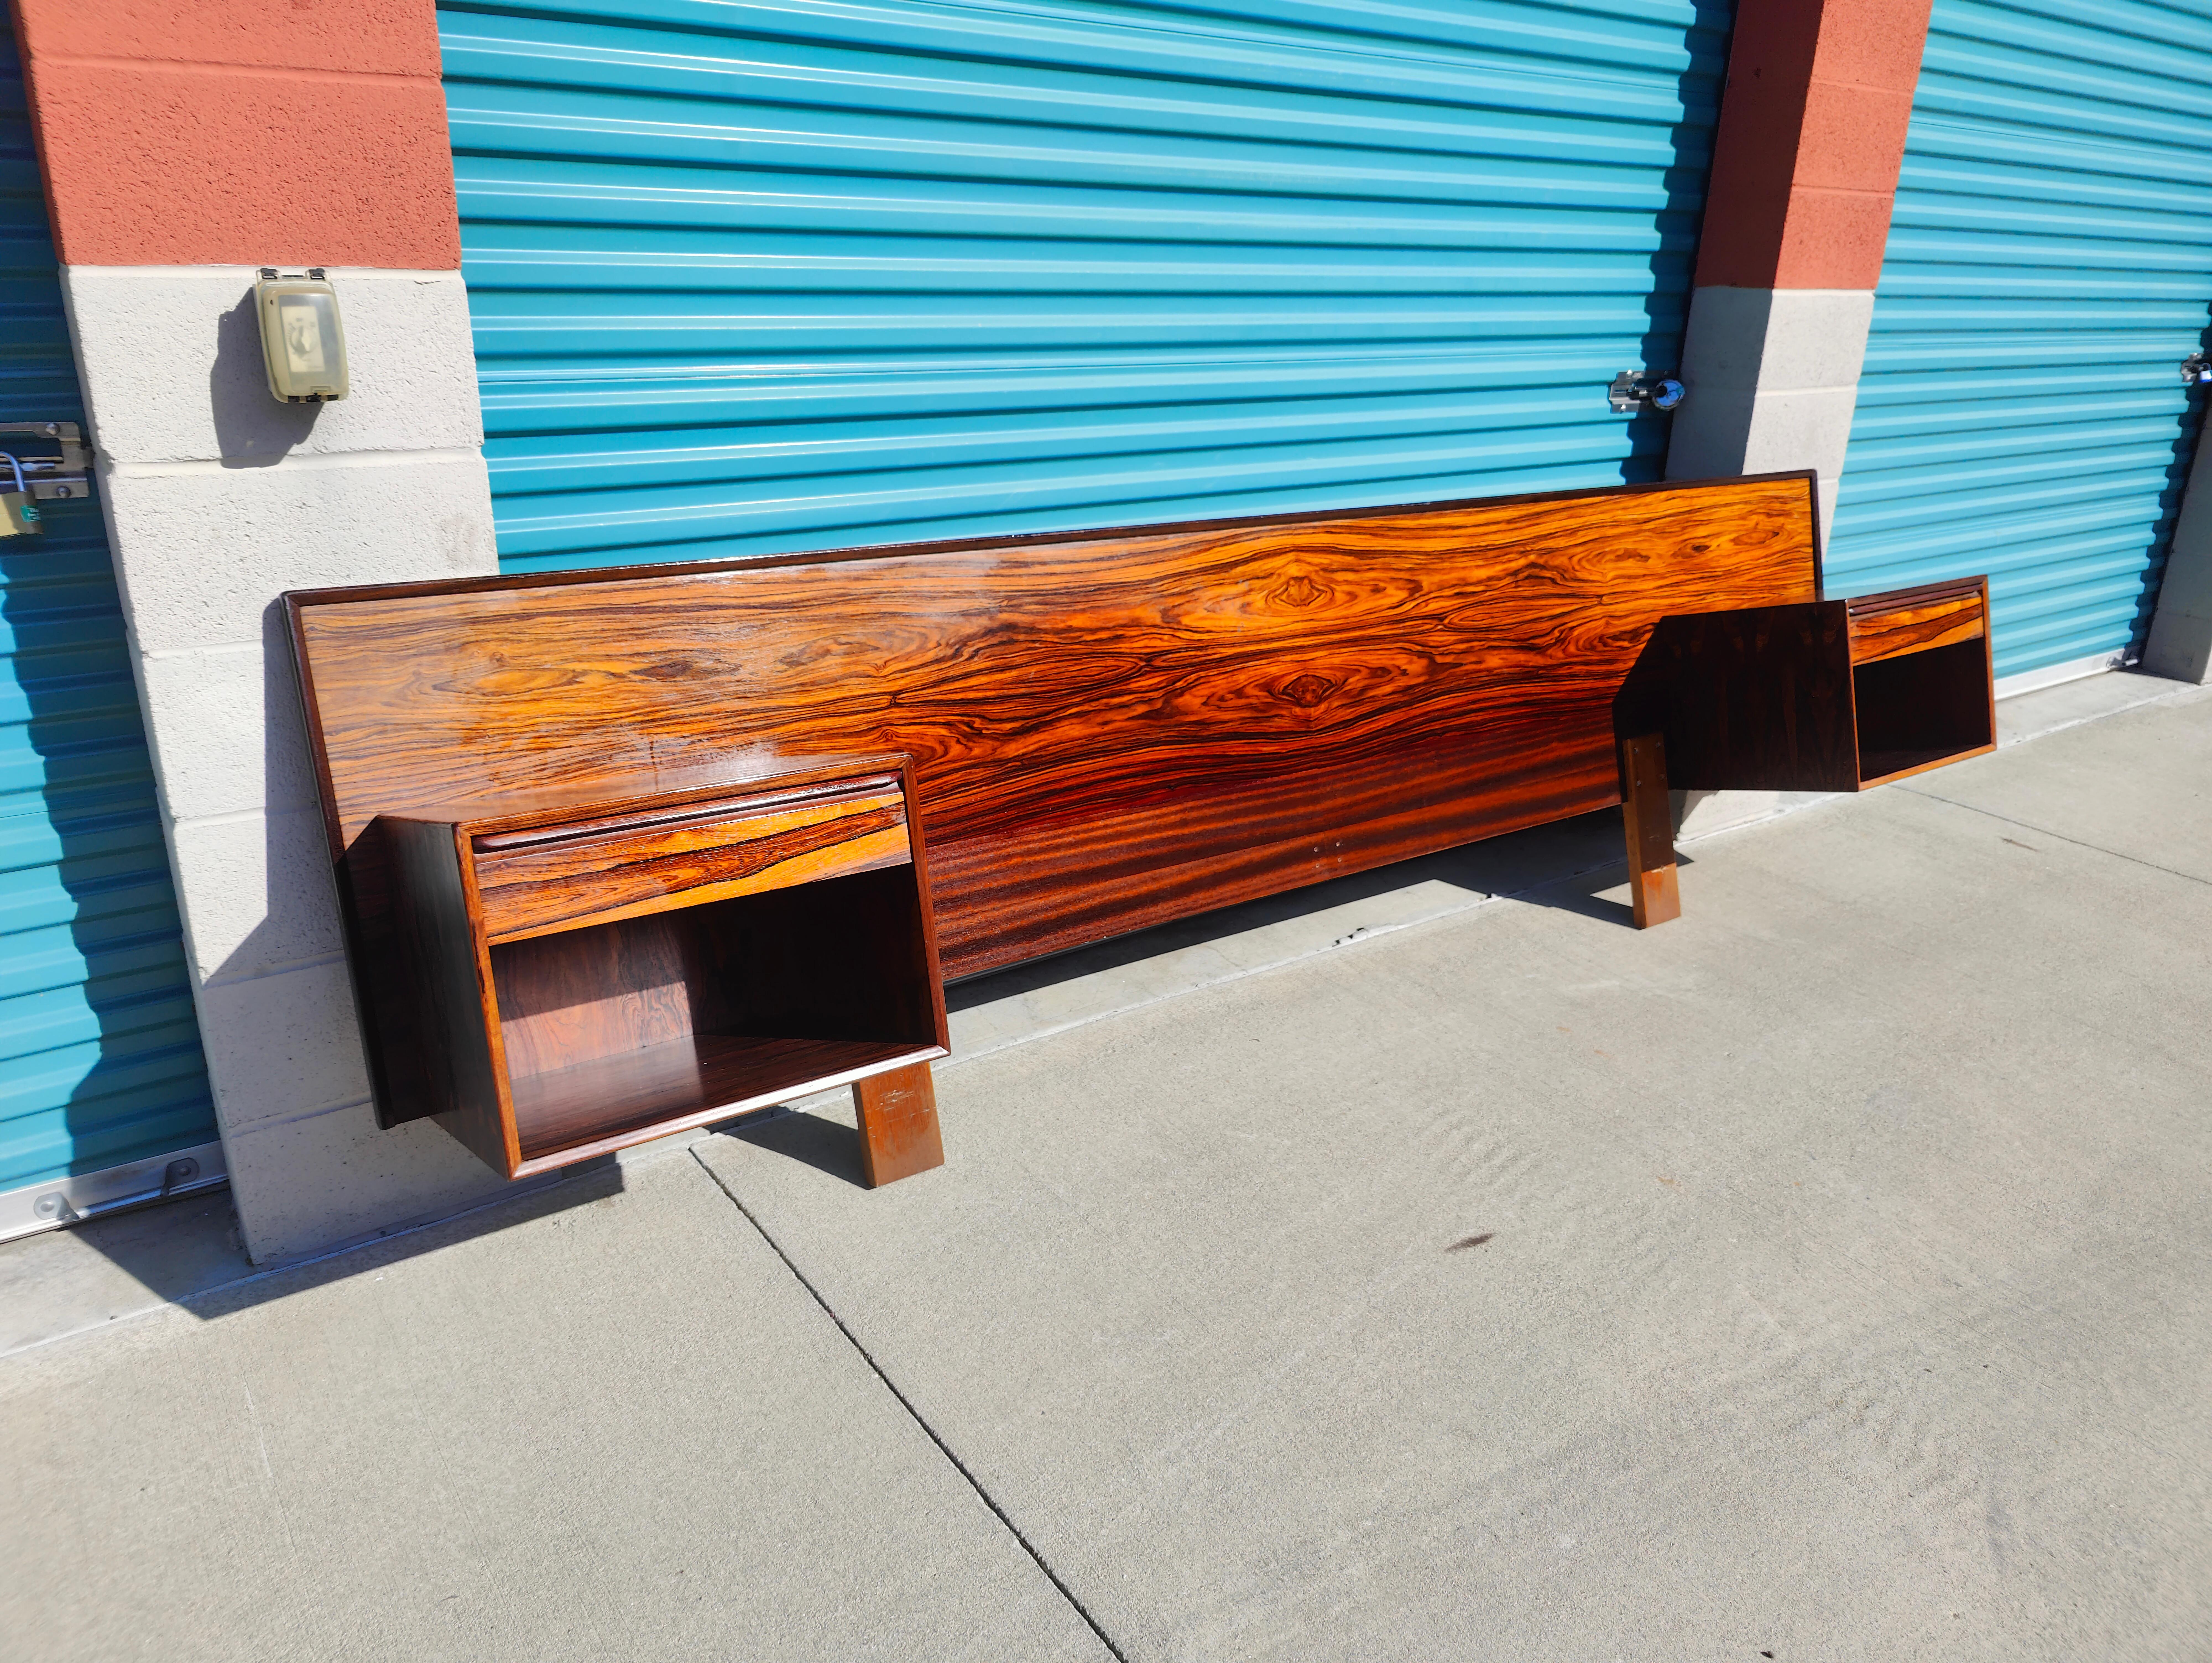 Now available is an amazing headboard by Westnofa. This beauty features a rosewood finish with floating nightstands attached by hardware. Not pictured but it includes a metal frame. Fits a Cal King mattress . Measures approximately 124 inches wide x